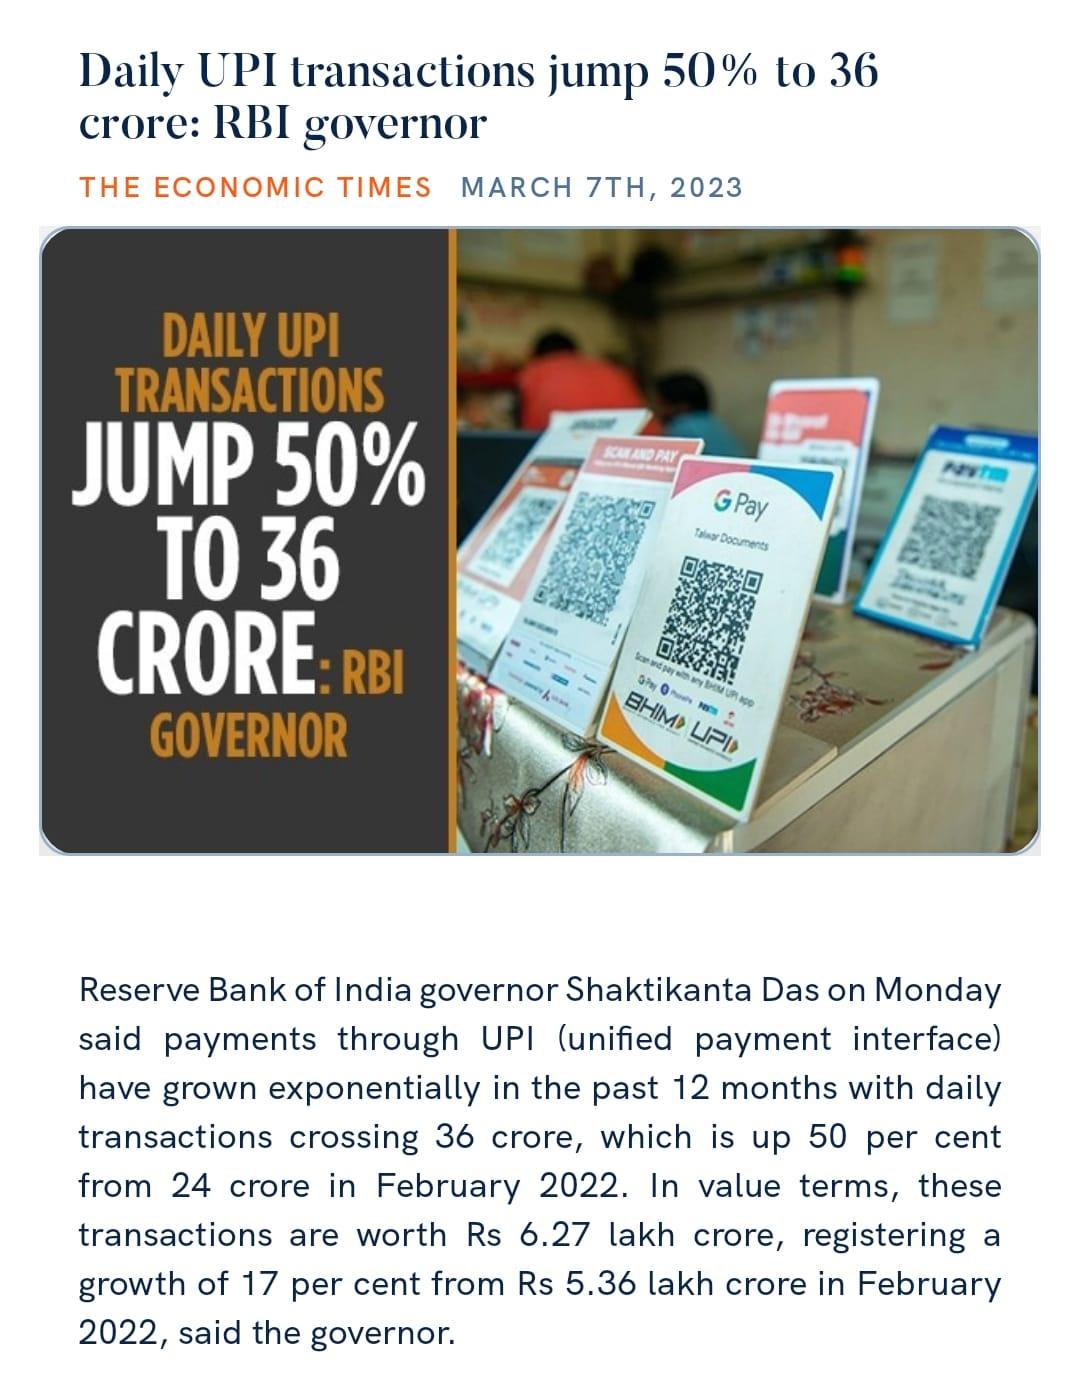 narendramodi_in on Twitter: "Daily UPI transactions jump 50% to 36 crore: RBI governor https://t.co/HE16i5CpzB https://t.co/lZFZmQdiWi" / Twitter